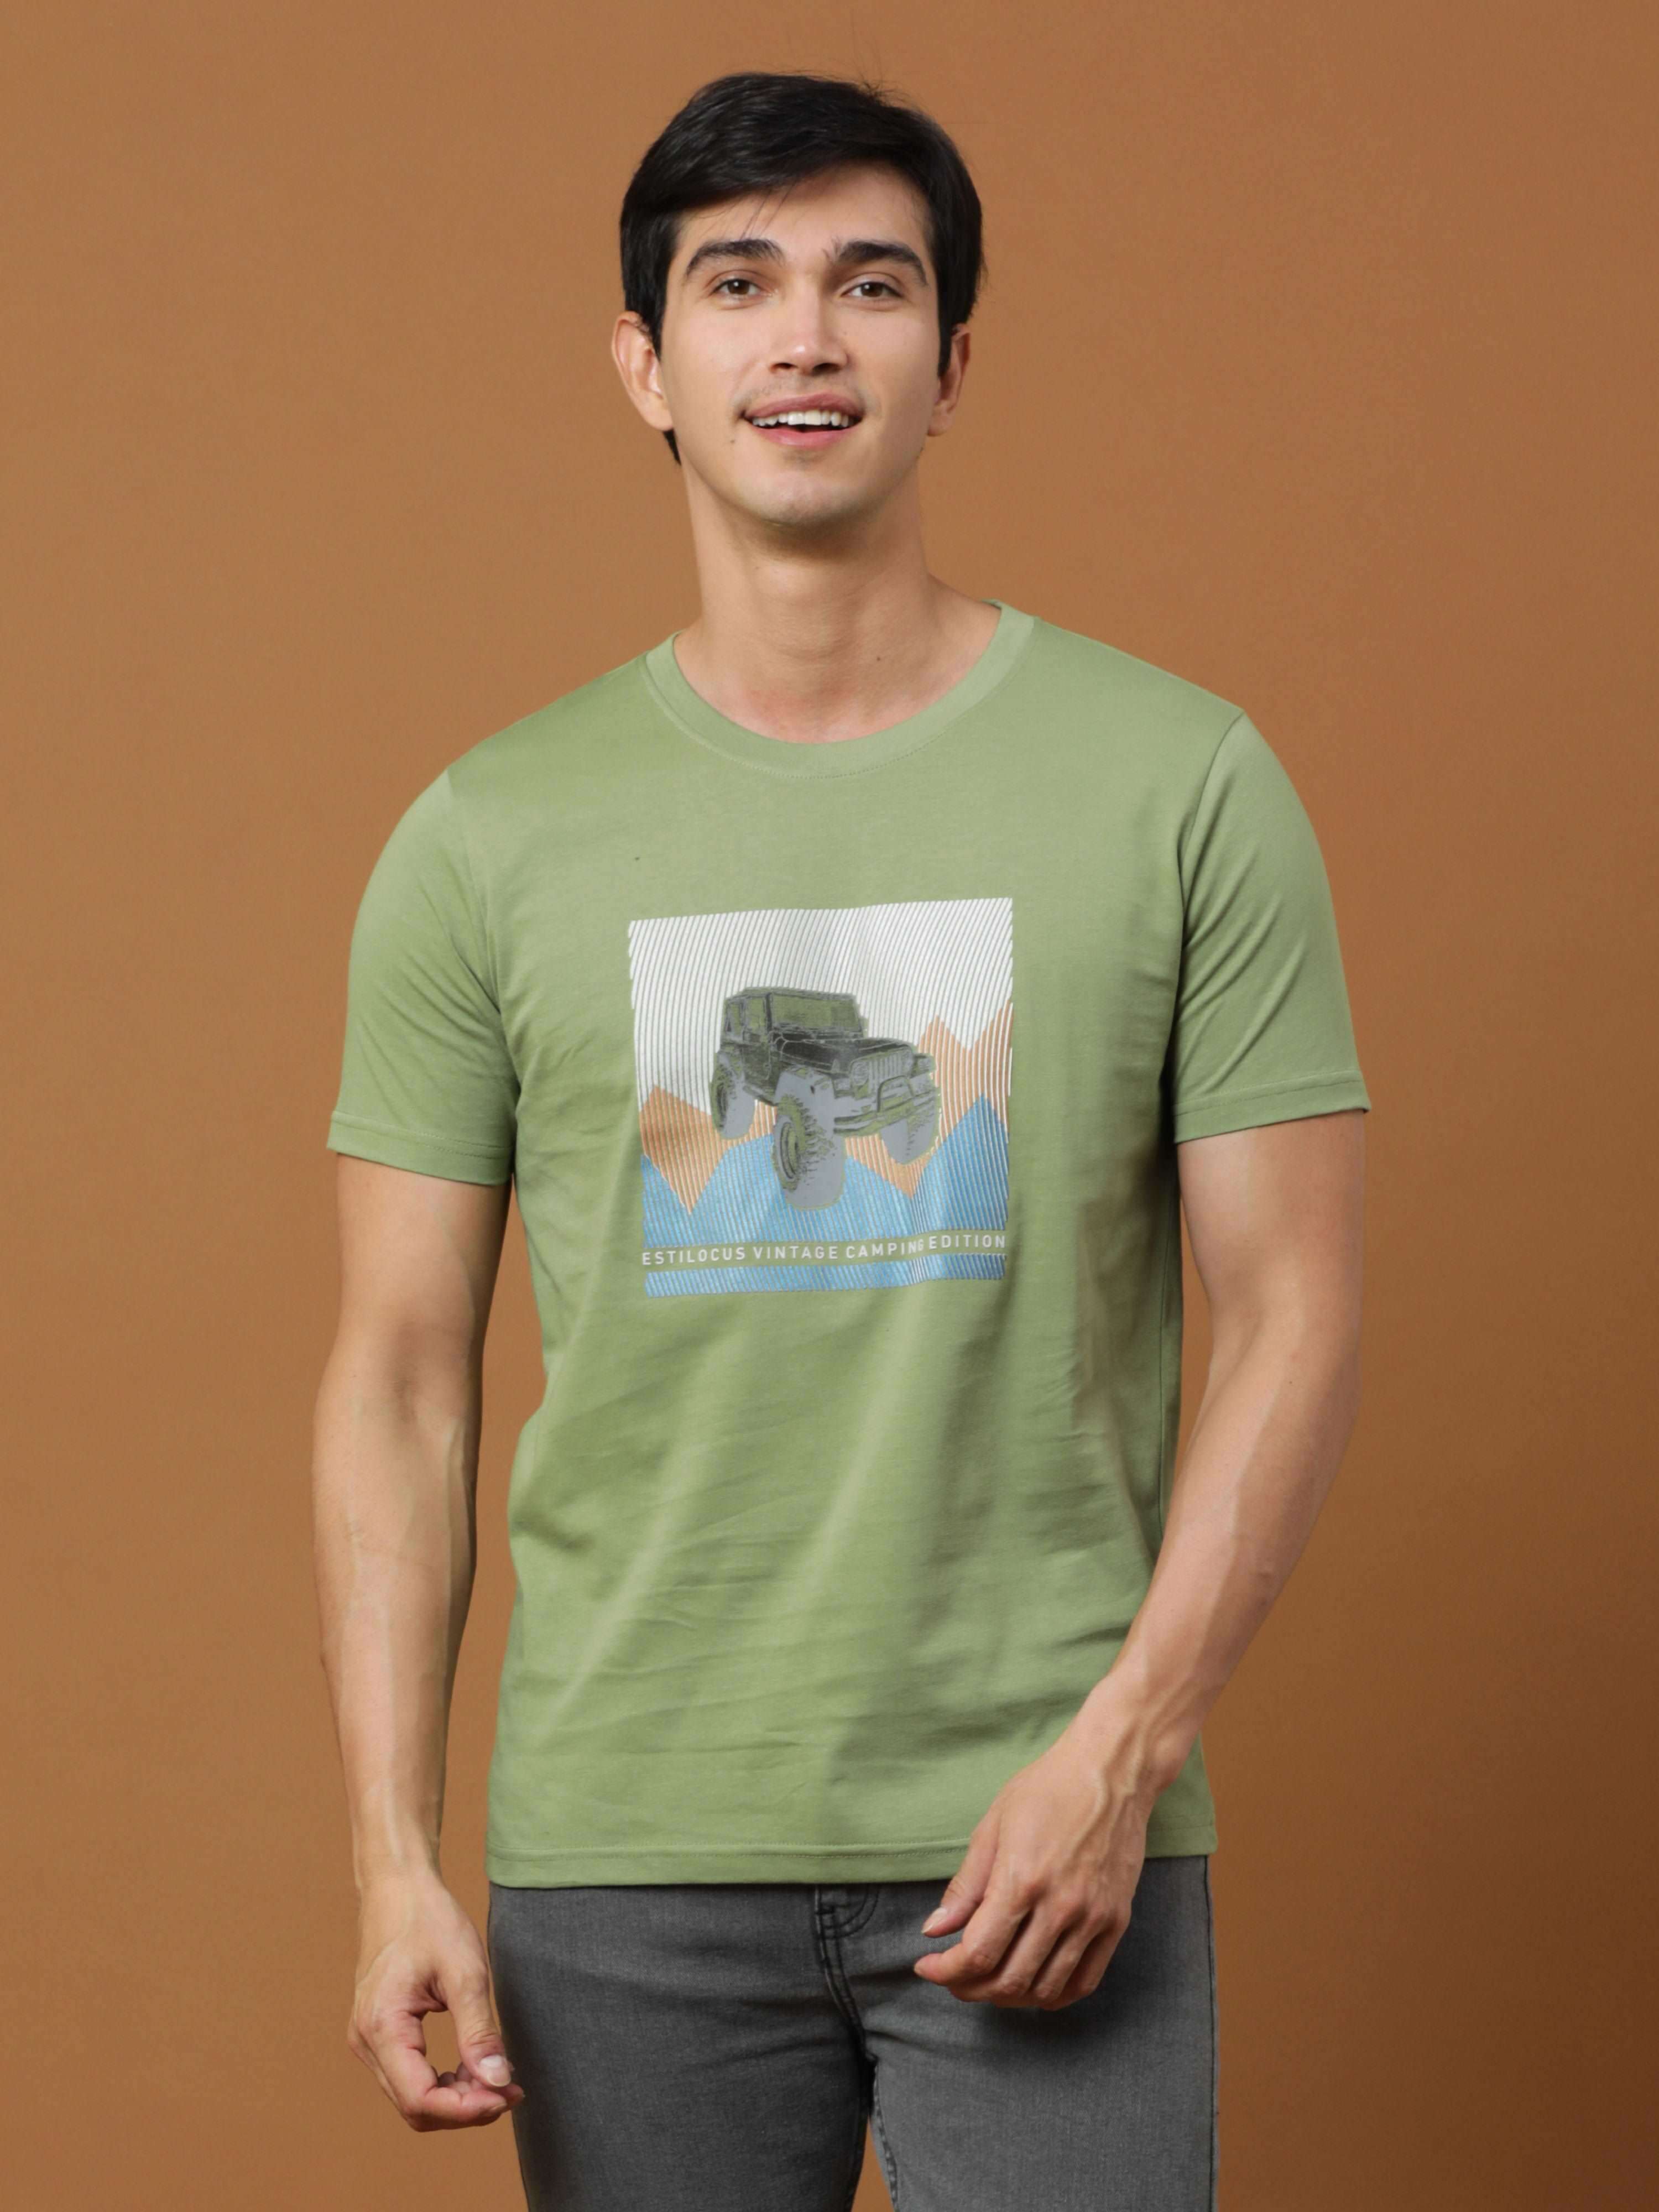 Camping Edition Lt Green Printed T Shirt shop online at Estilocus. 100% Cotton Designed and printed on knitted fabric. The fabric is stretchy and lightweight, with a soft skin feel and no wrinkles. Crew neck collar which is smooth on the neck and keeps yo